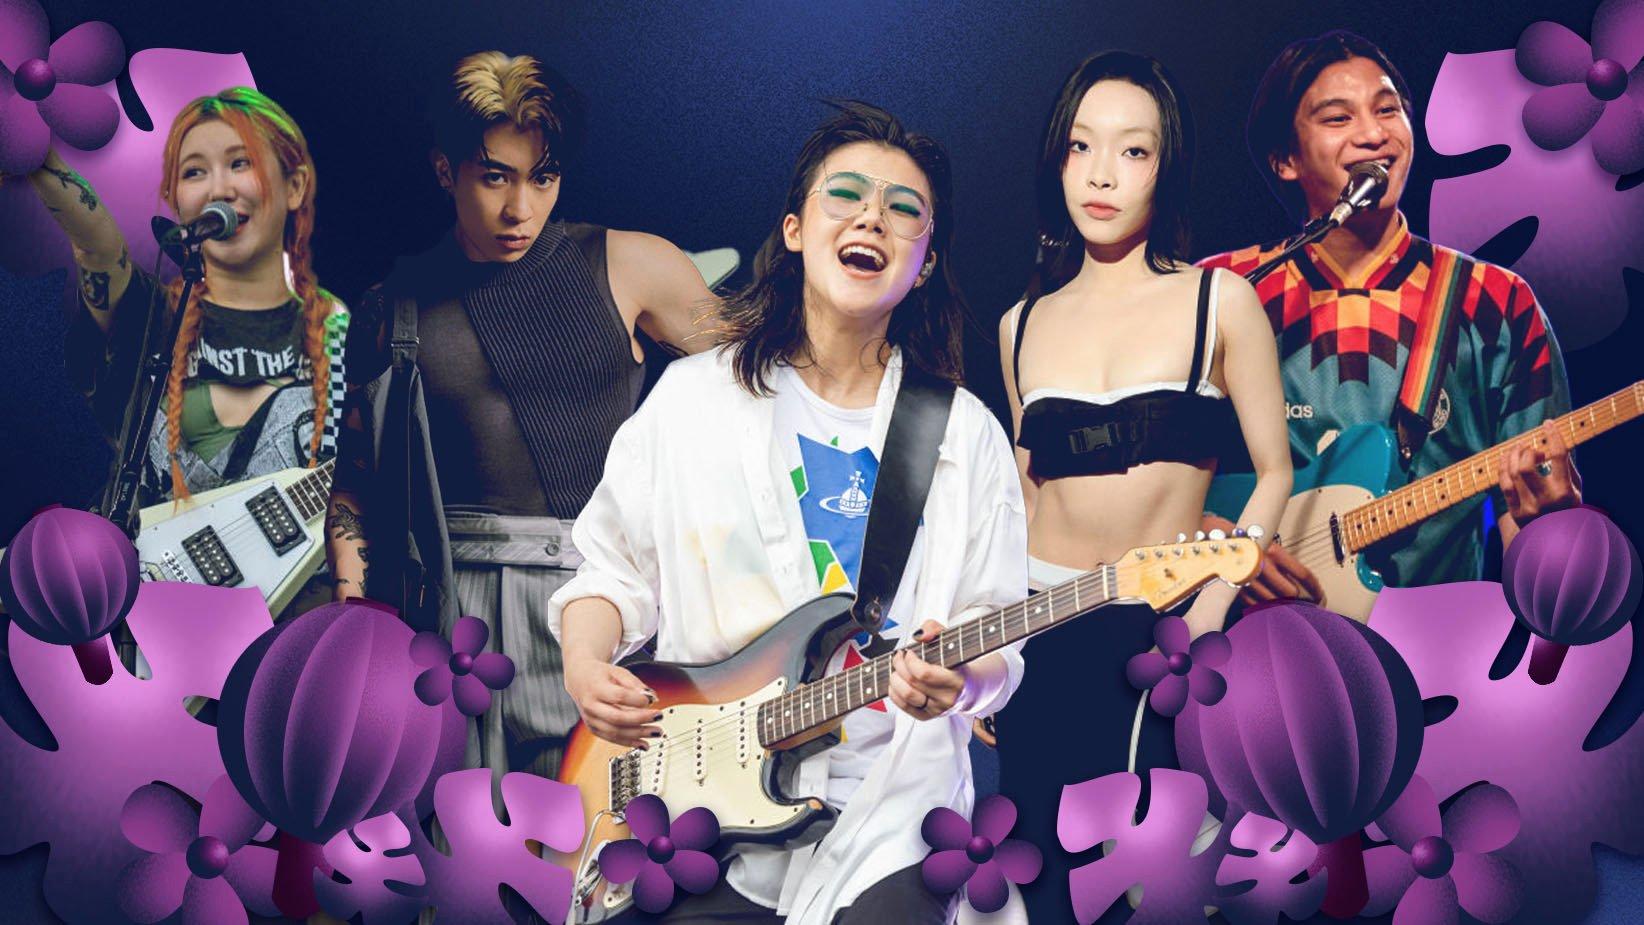 Get To Know The Many Sounds Of Asian Pop From The Philippines BGYO To Hong Kongs Tyson Yoshi and Thai Singer Phum Viphurit GRAMMY